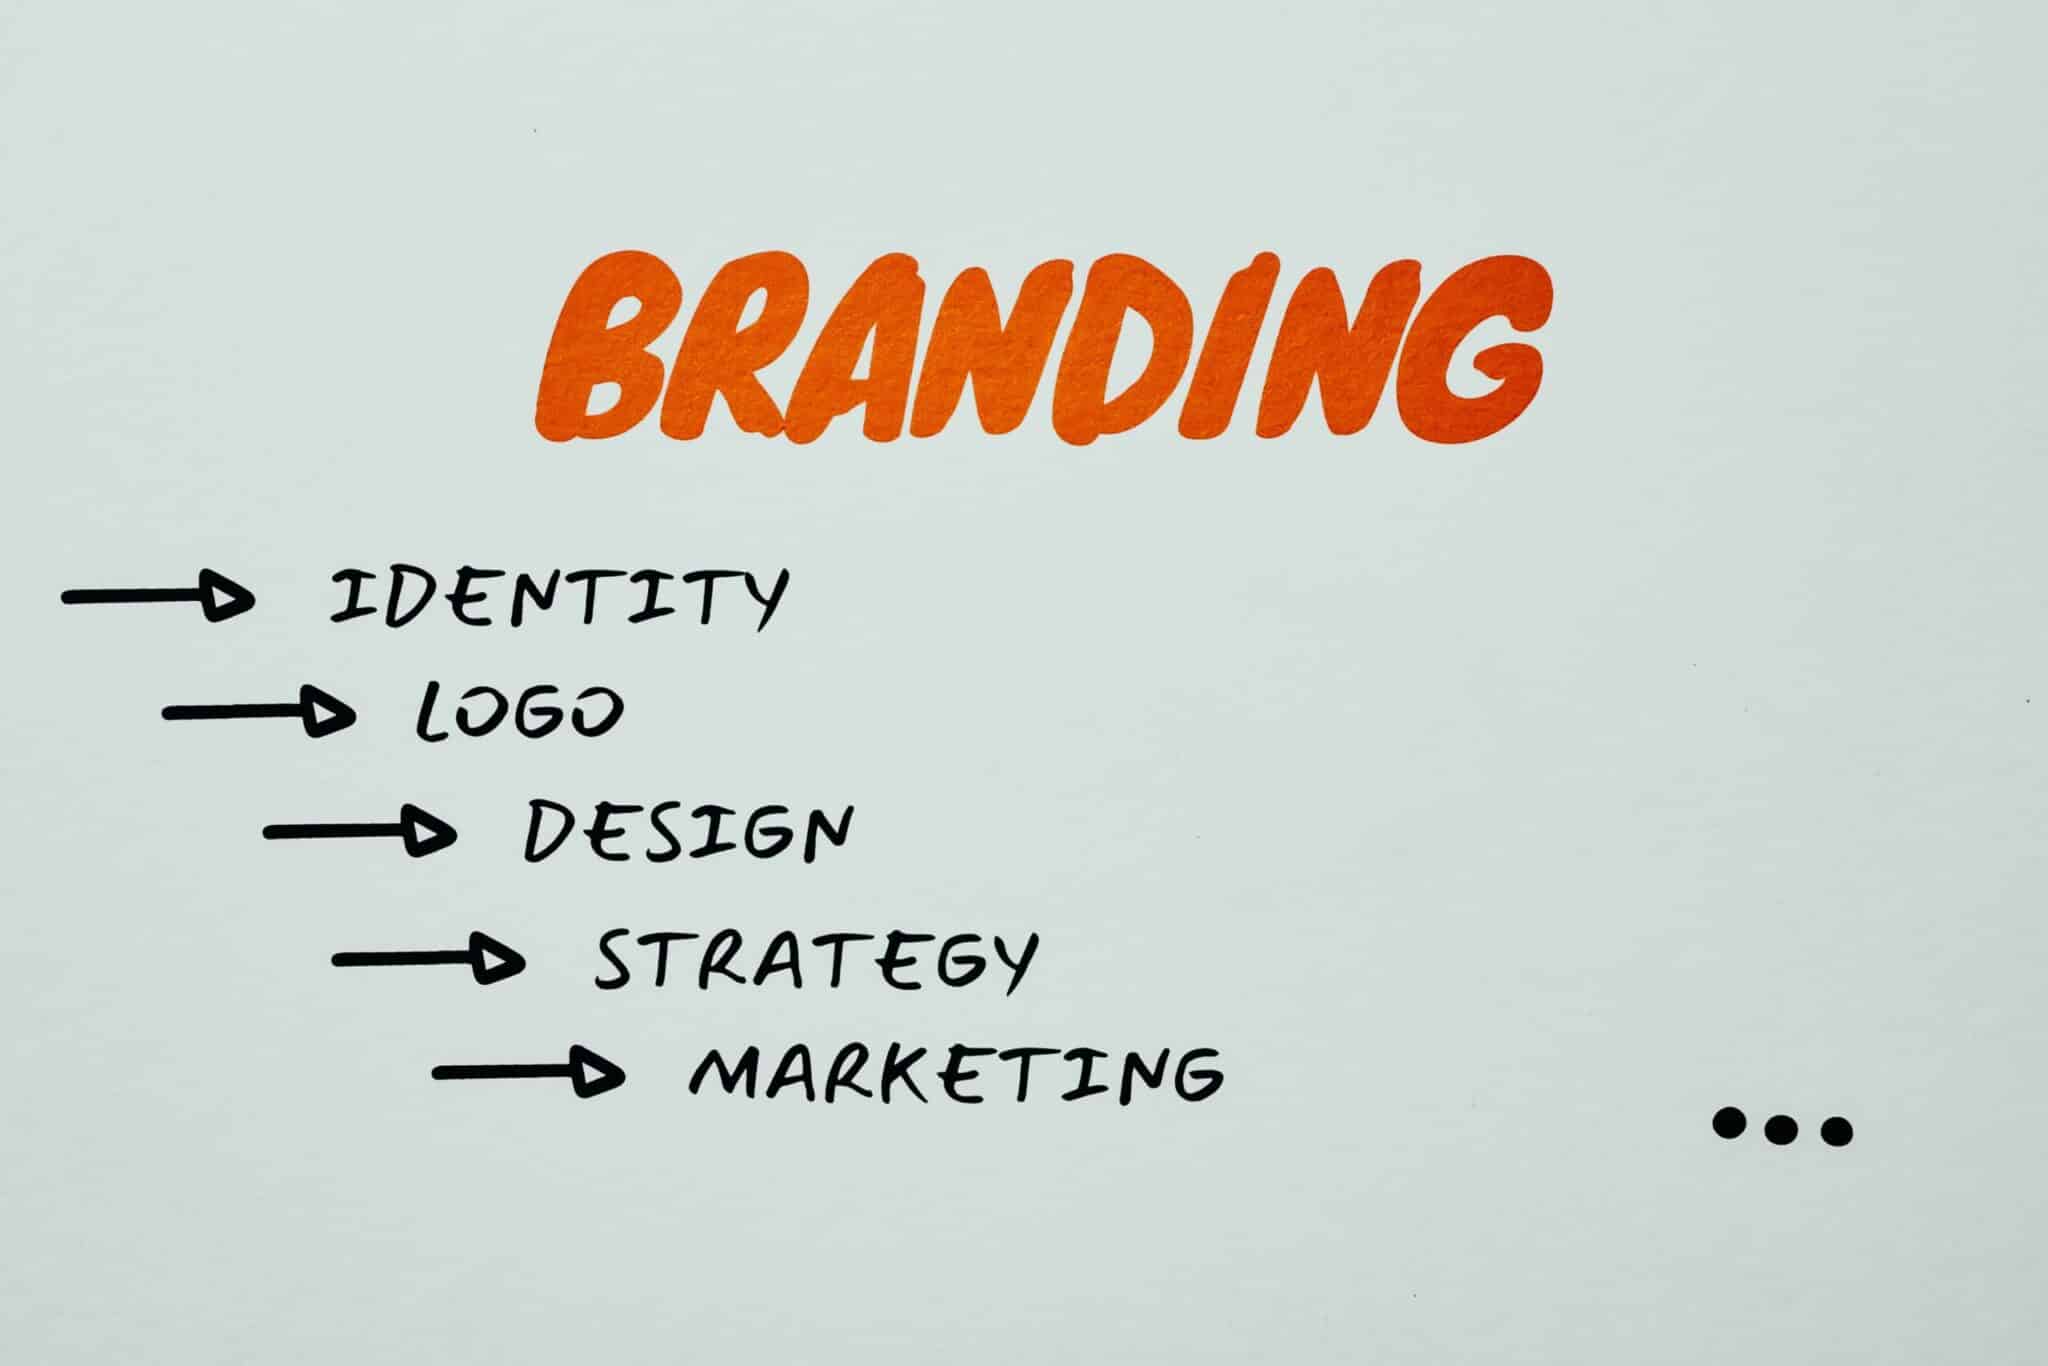 How to Successfully Rebrand Your Business